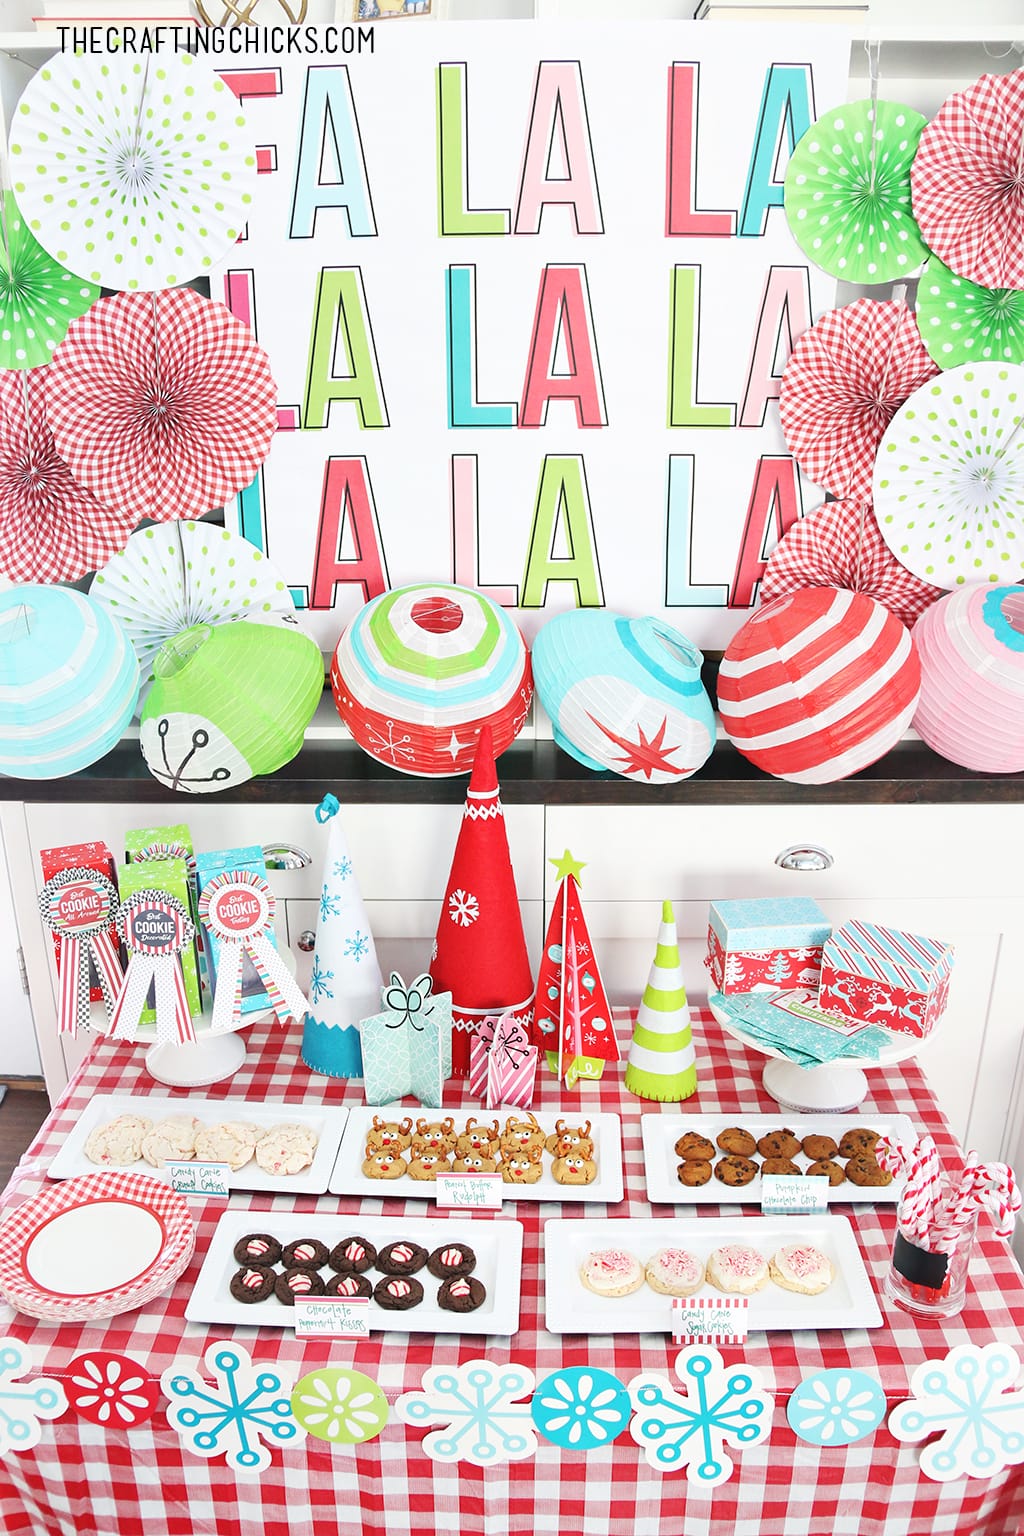 Our Cookie Exchange Party Backdrop is the perfect addition to any holiday party, but goes beautifully with the Tween Cookie Exchange we threw. 